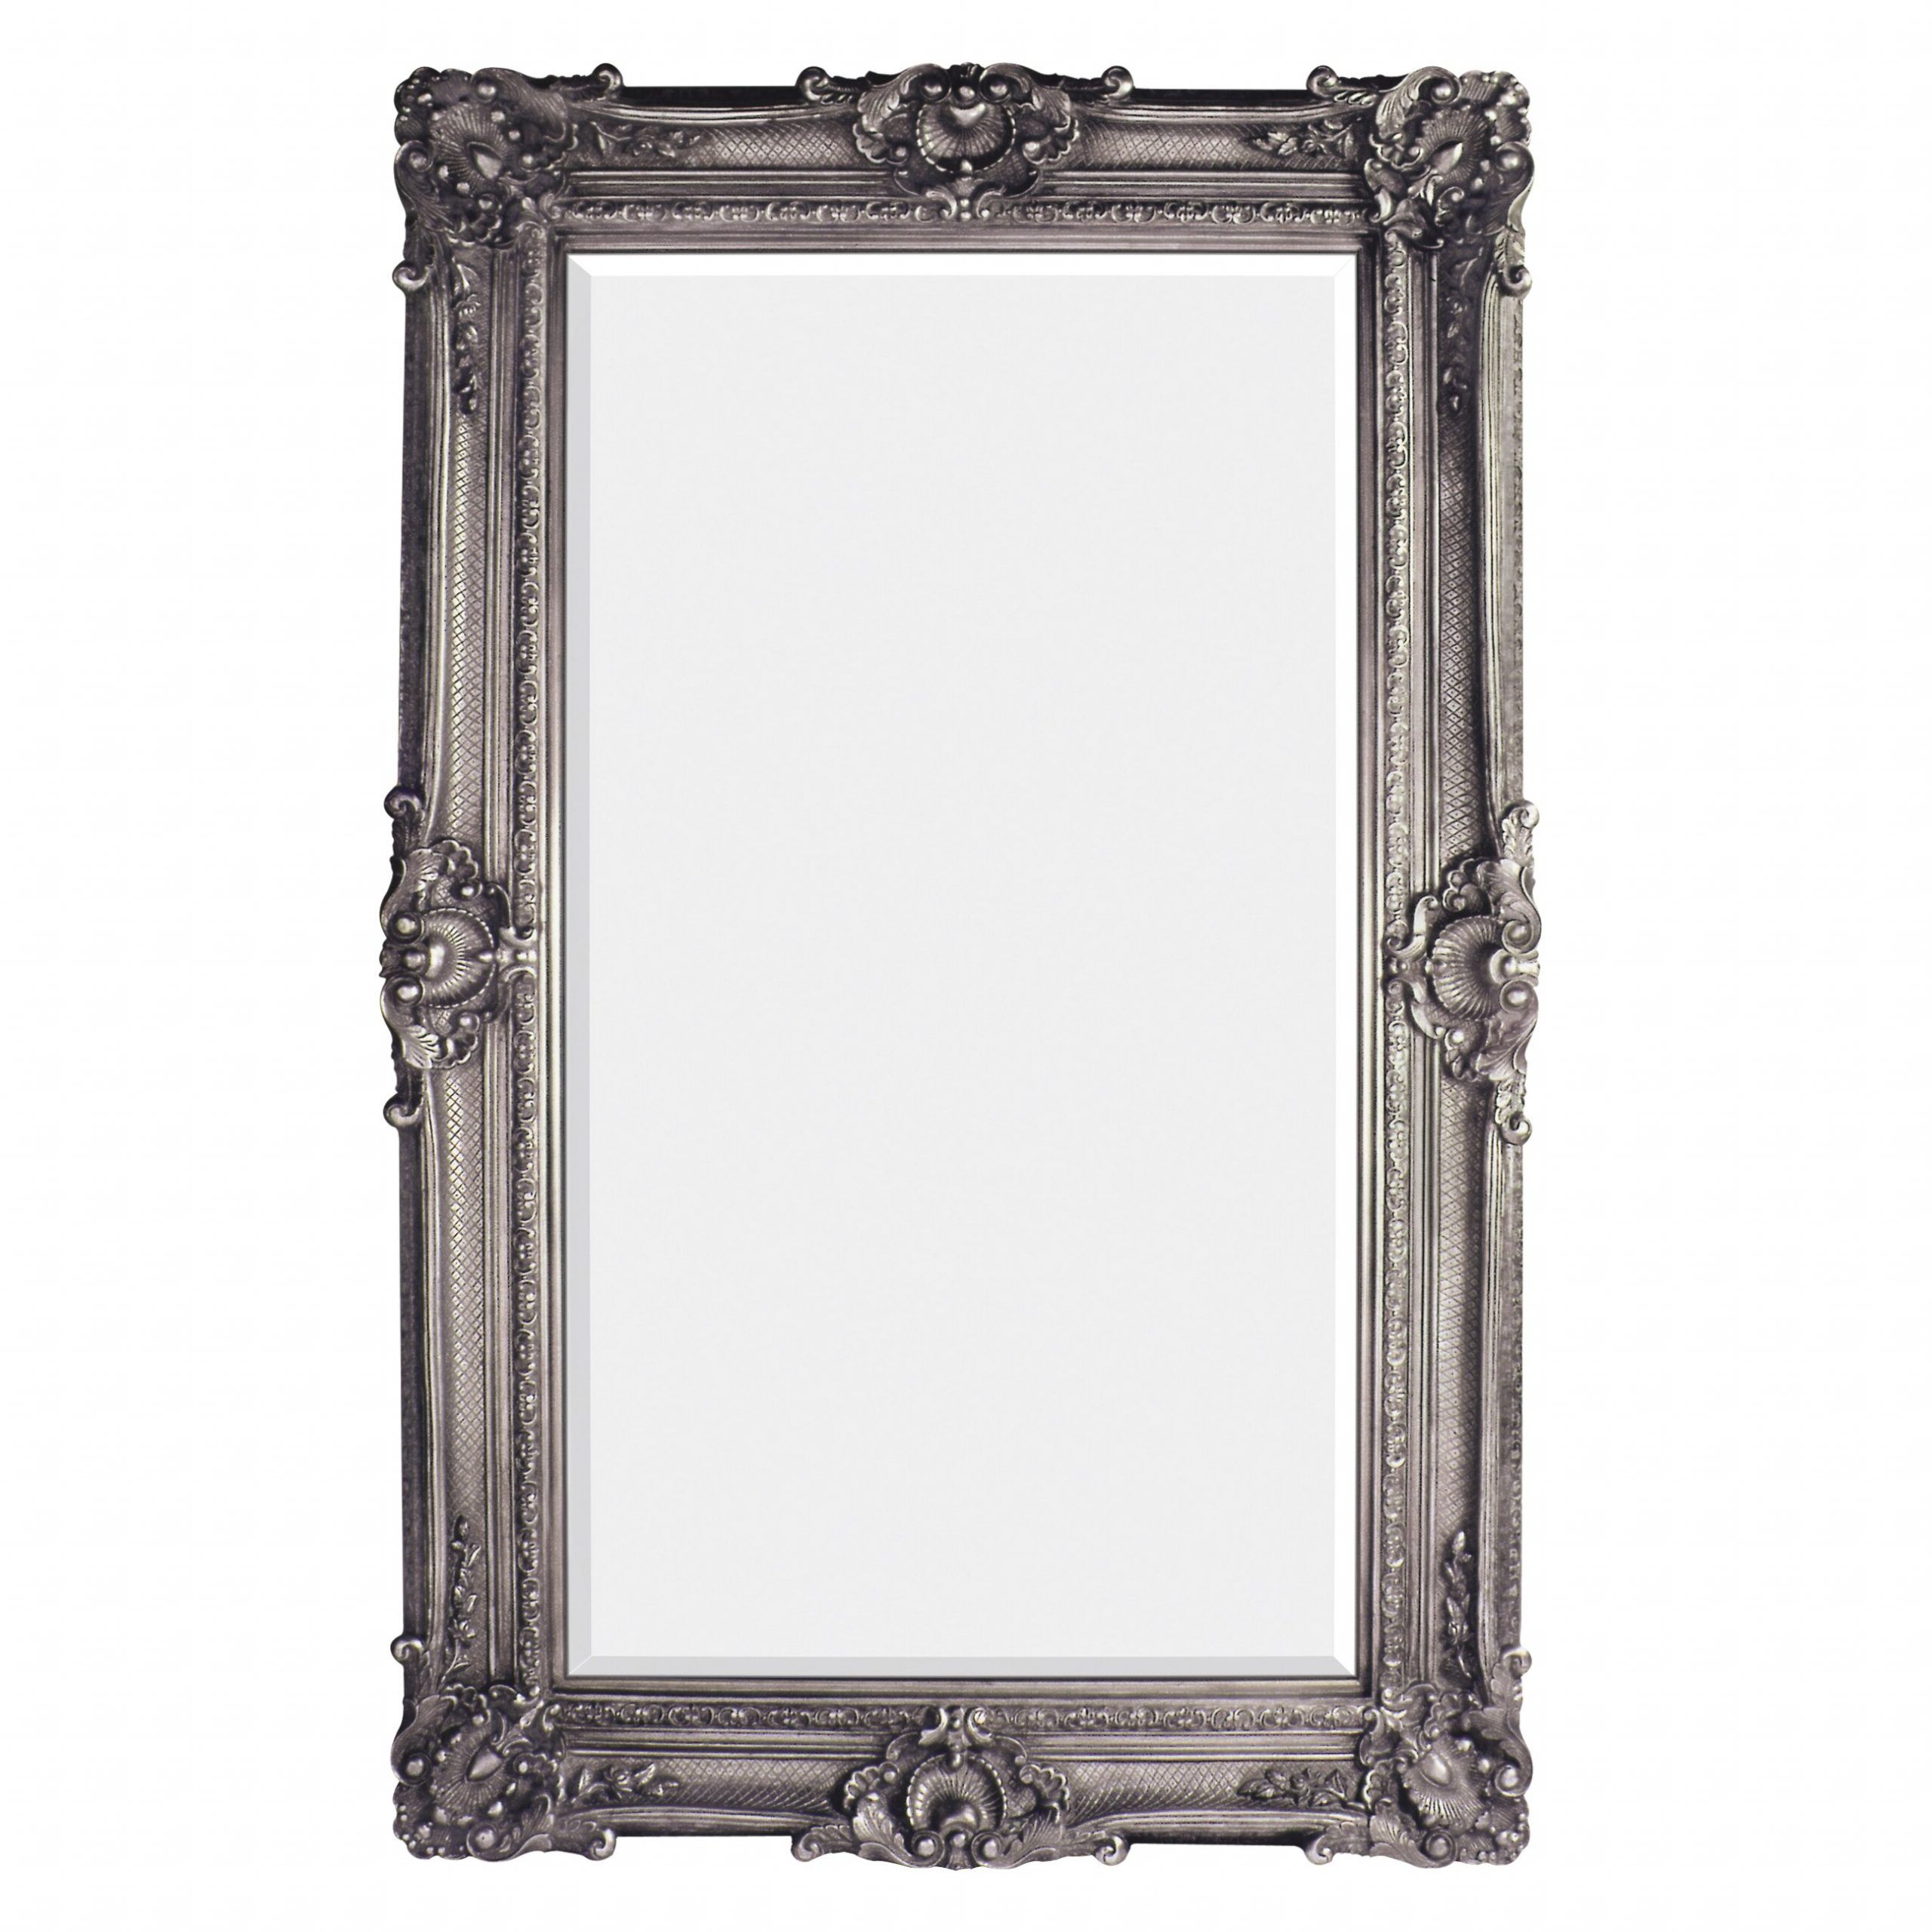 Majestic Mirror Antique Silver Leaf Finish Traditional Framed Beveled Pertaining To Most Popular Metallic Gold Leaf Wall Mirrors (View 2 of 15)